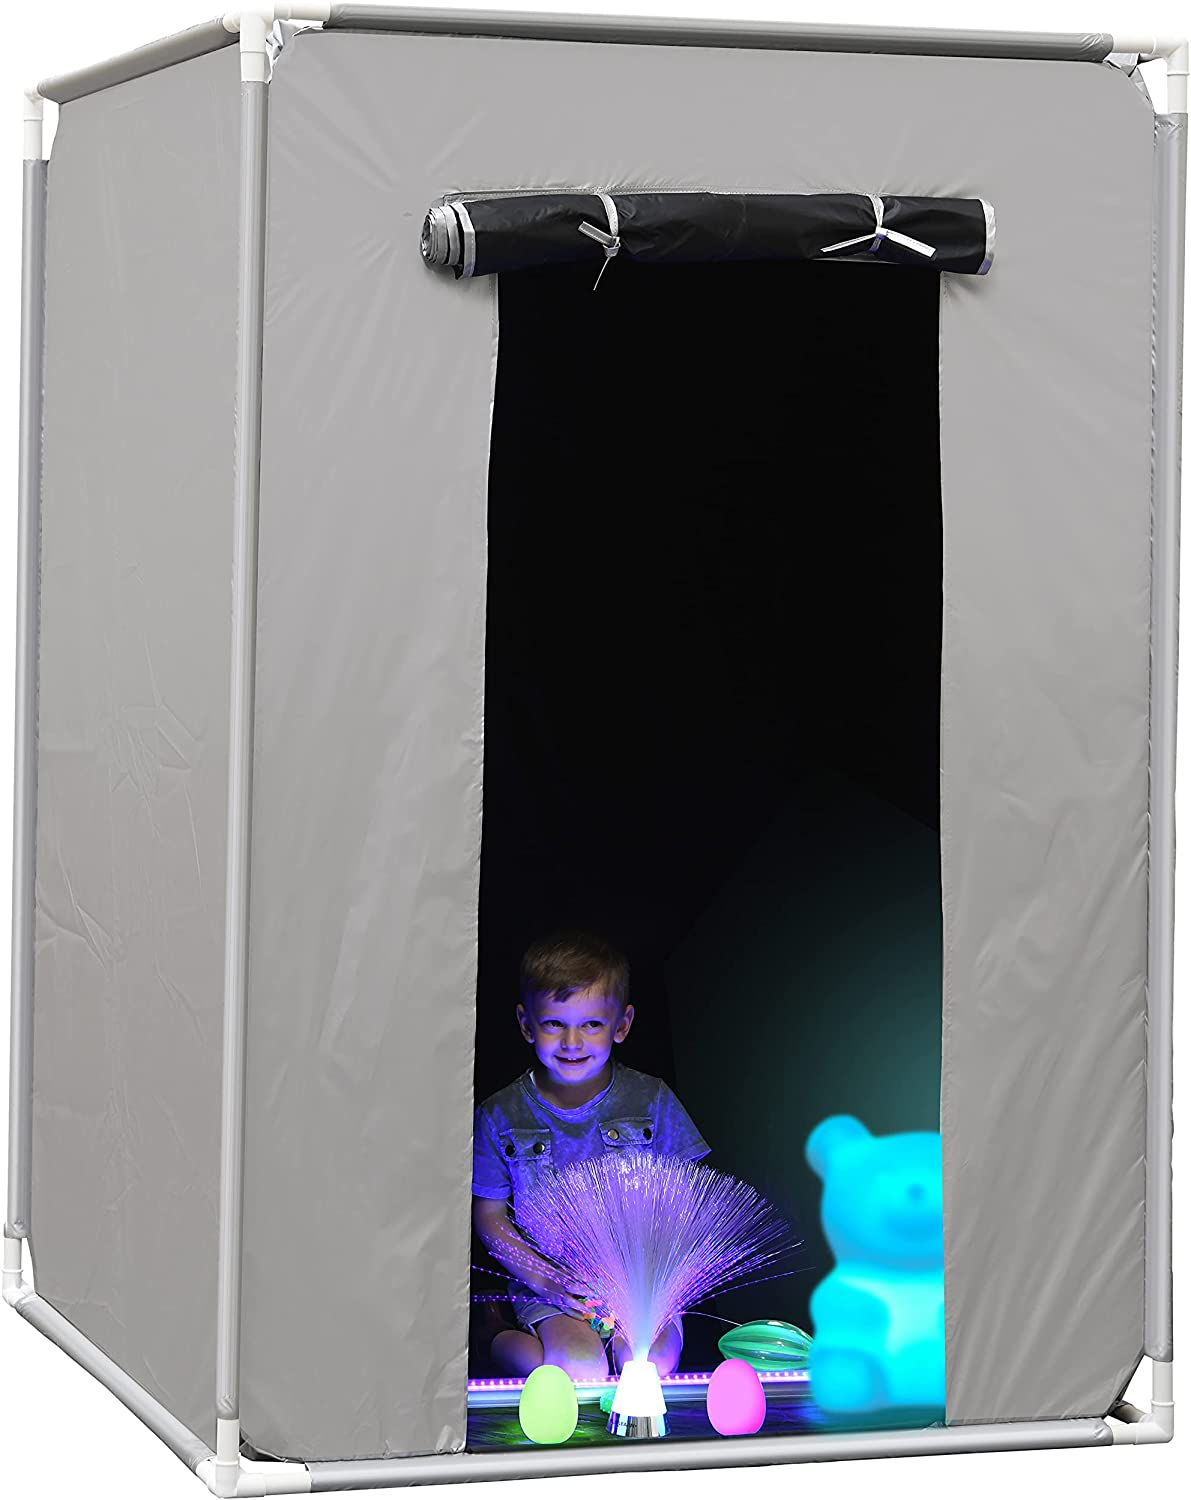 Playlearn Blackout Sensory Tent – Kids Play Tent - Ideal Calm Down Corner for Autistic Children (6 FT)